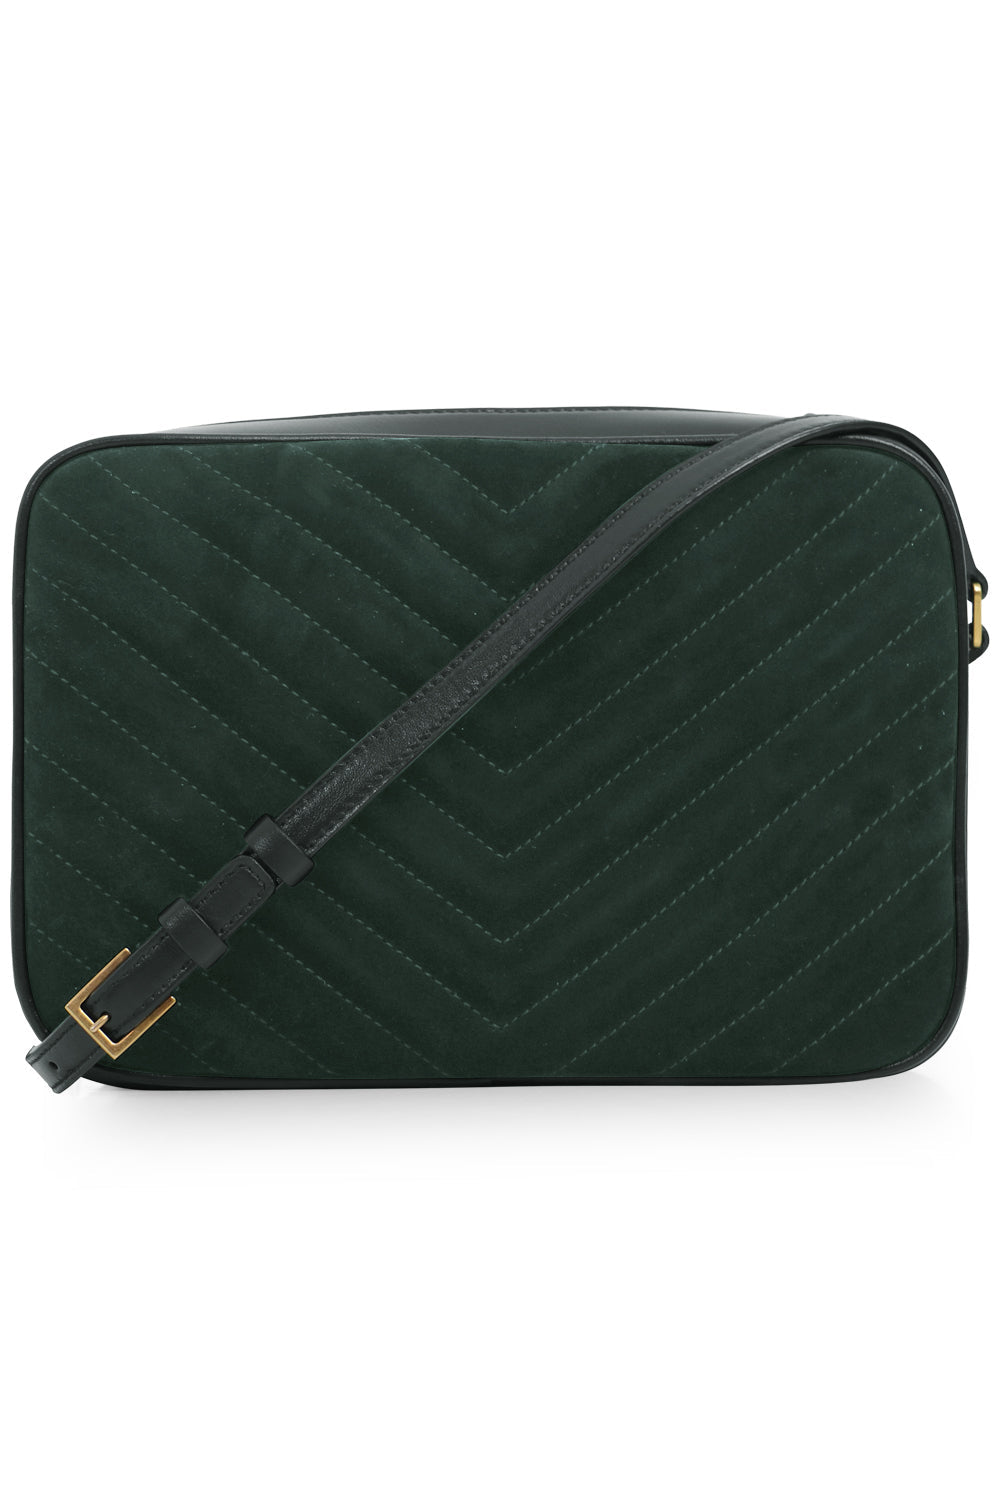 SAINT LAURENT BAGS MULTI LOU QUILTED SUEDE CAMERA BAG | NEW VERT FONCE/GOLD